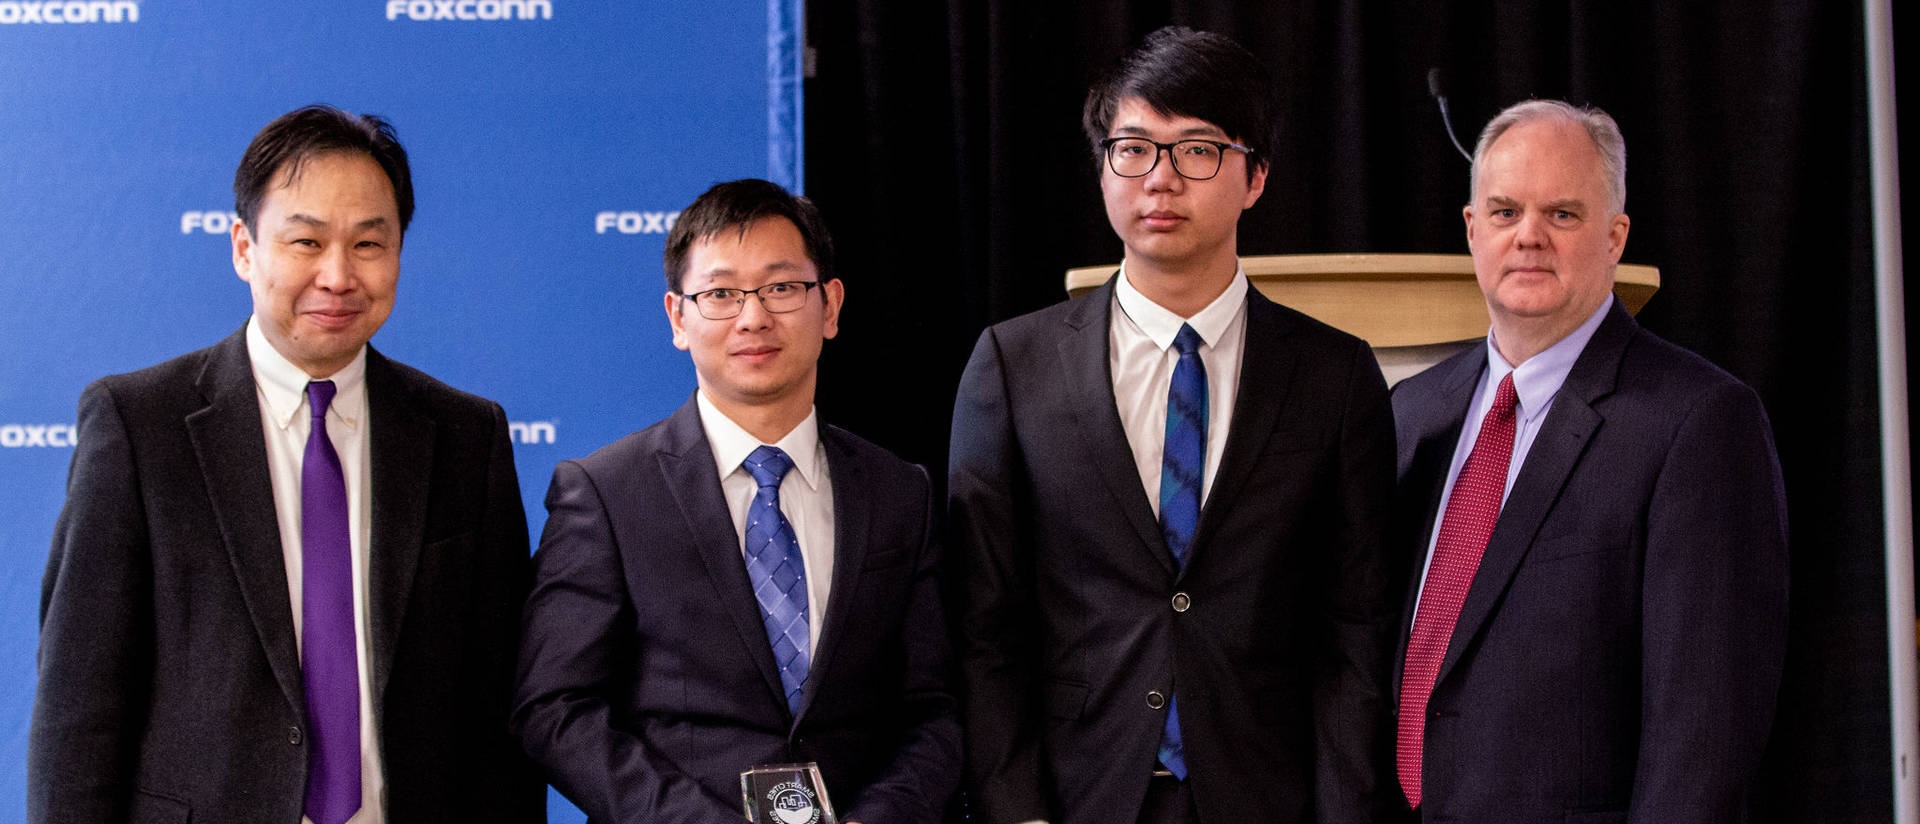 Dr. Wufeng Tian (second from left) and Huoyu Xu (third from left), along with FoxConn representatives at the Smart Cities-Smart Futures Competition. Xu is the student representative for the grand-prize team that created the B.E.S.T. Sign project.